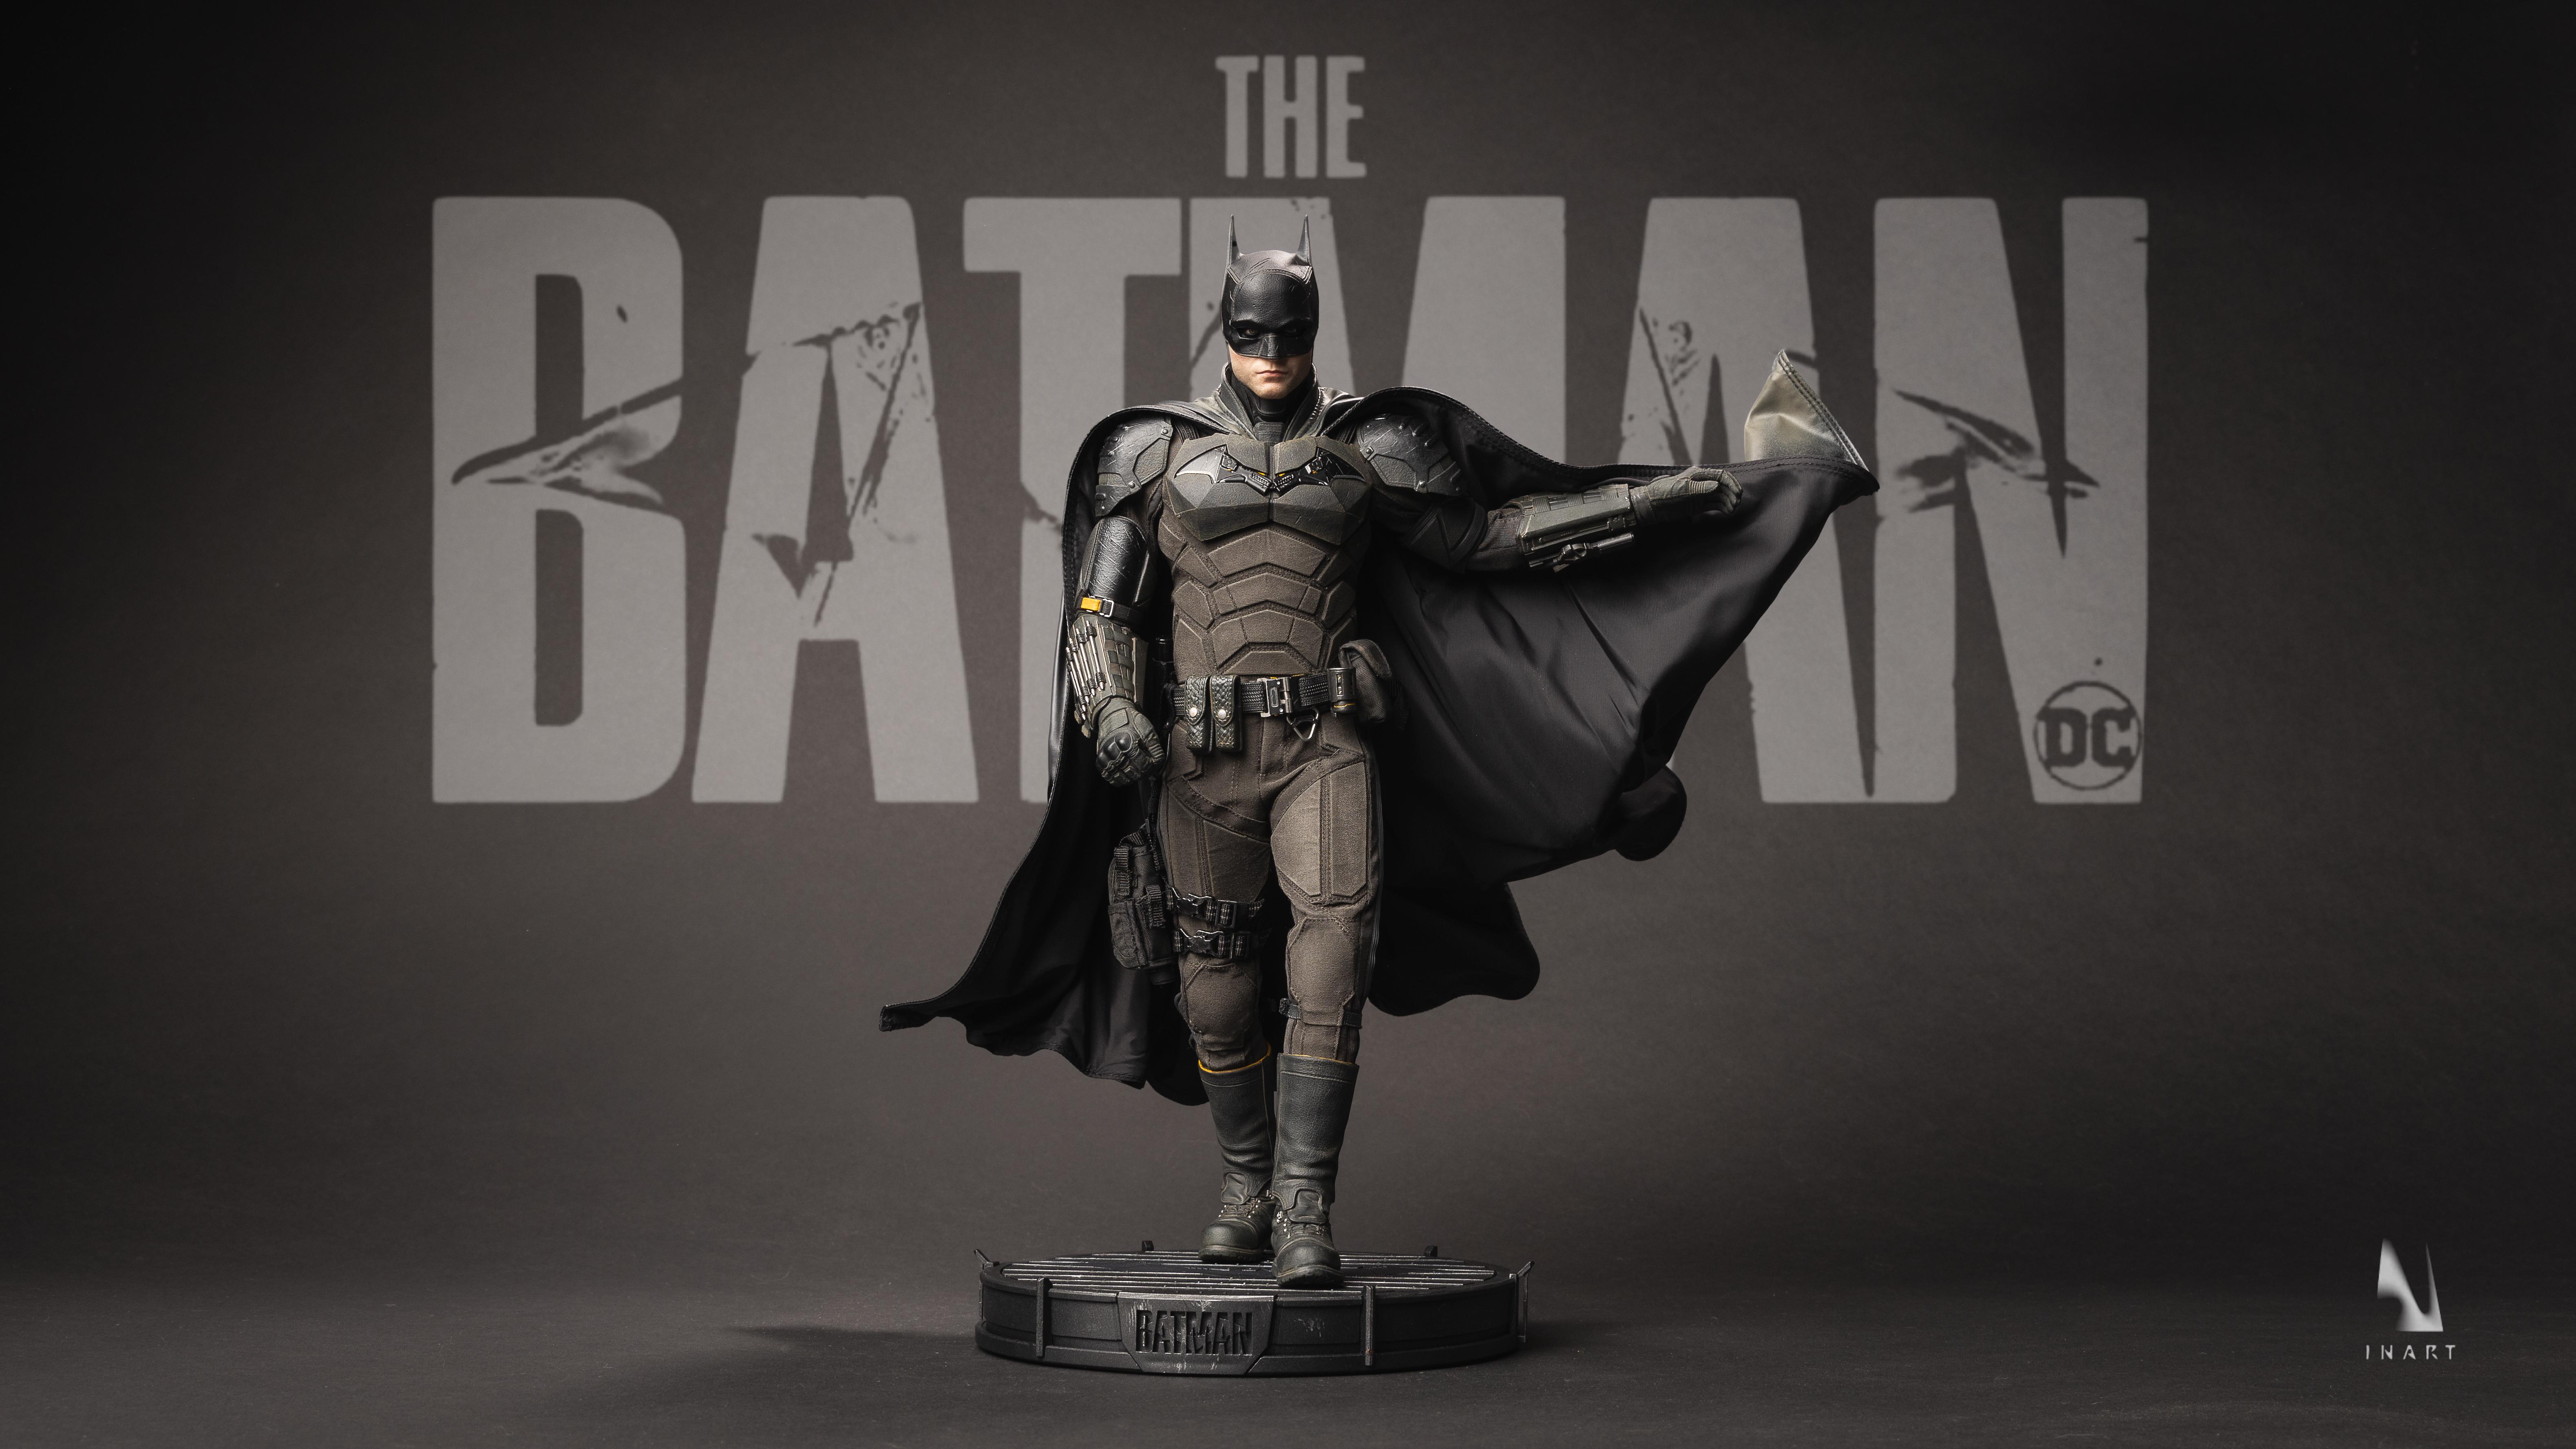 General 6318x3554 The Batman (2022) action figures superhero Robert Pattinson actor Warner Brothers movies movie characters cape DC Comics watermarked simple background CGI utility belt face mask